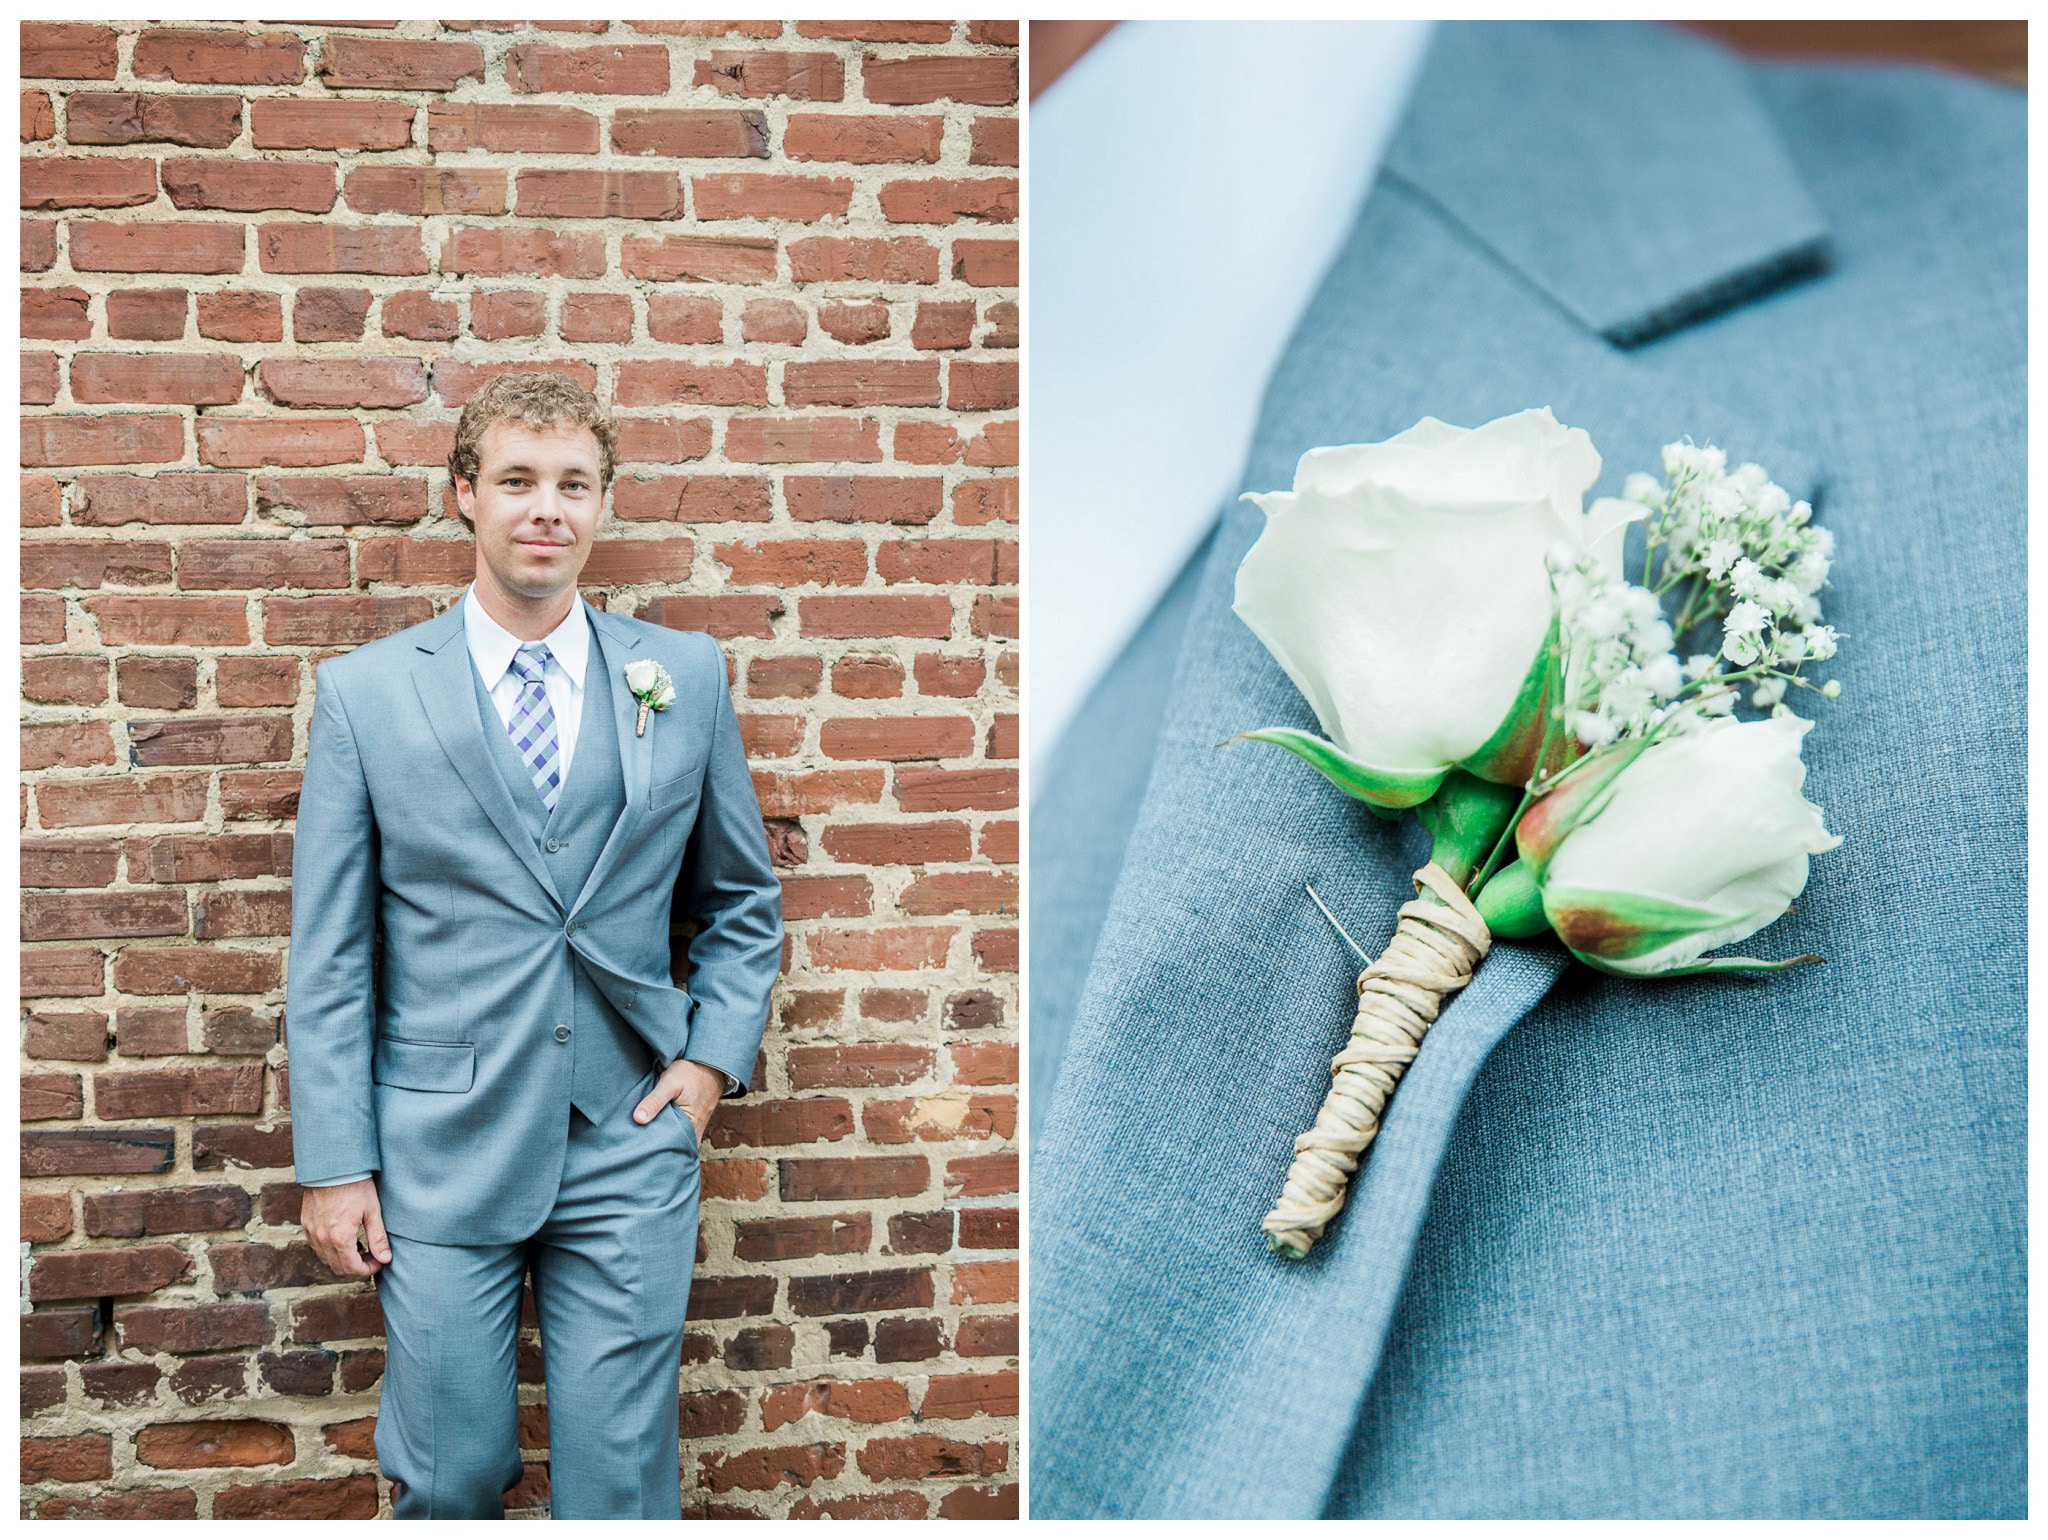 The groom - Looking Sharp and his Boutonnière Venue and Catering – King plow Event Gallery and Bold American Events Decor and flowers – Stylish Stems Music and Band – Seven Sharp Nine Transportation – Georgia Trolley Photographer One Life Photography